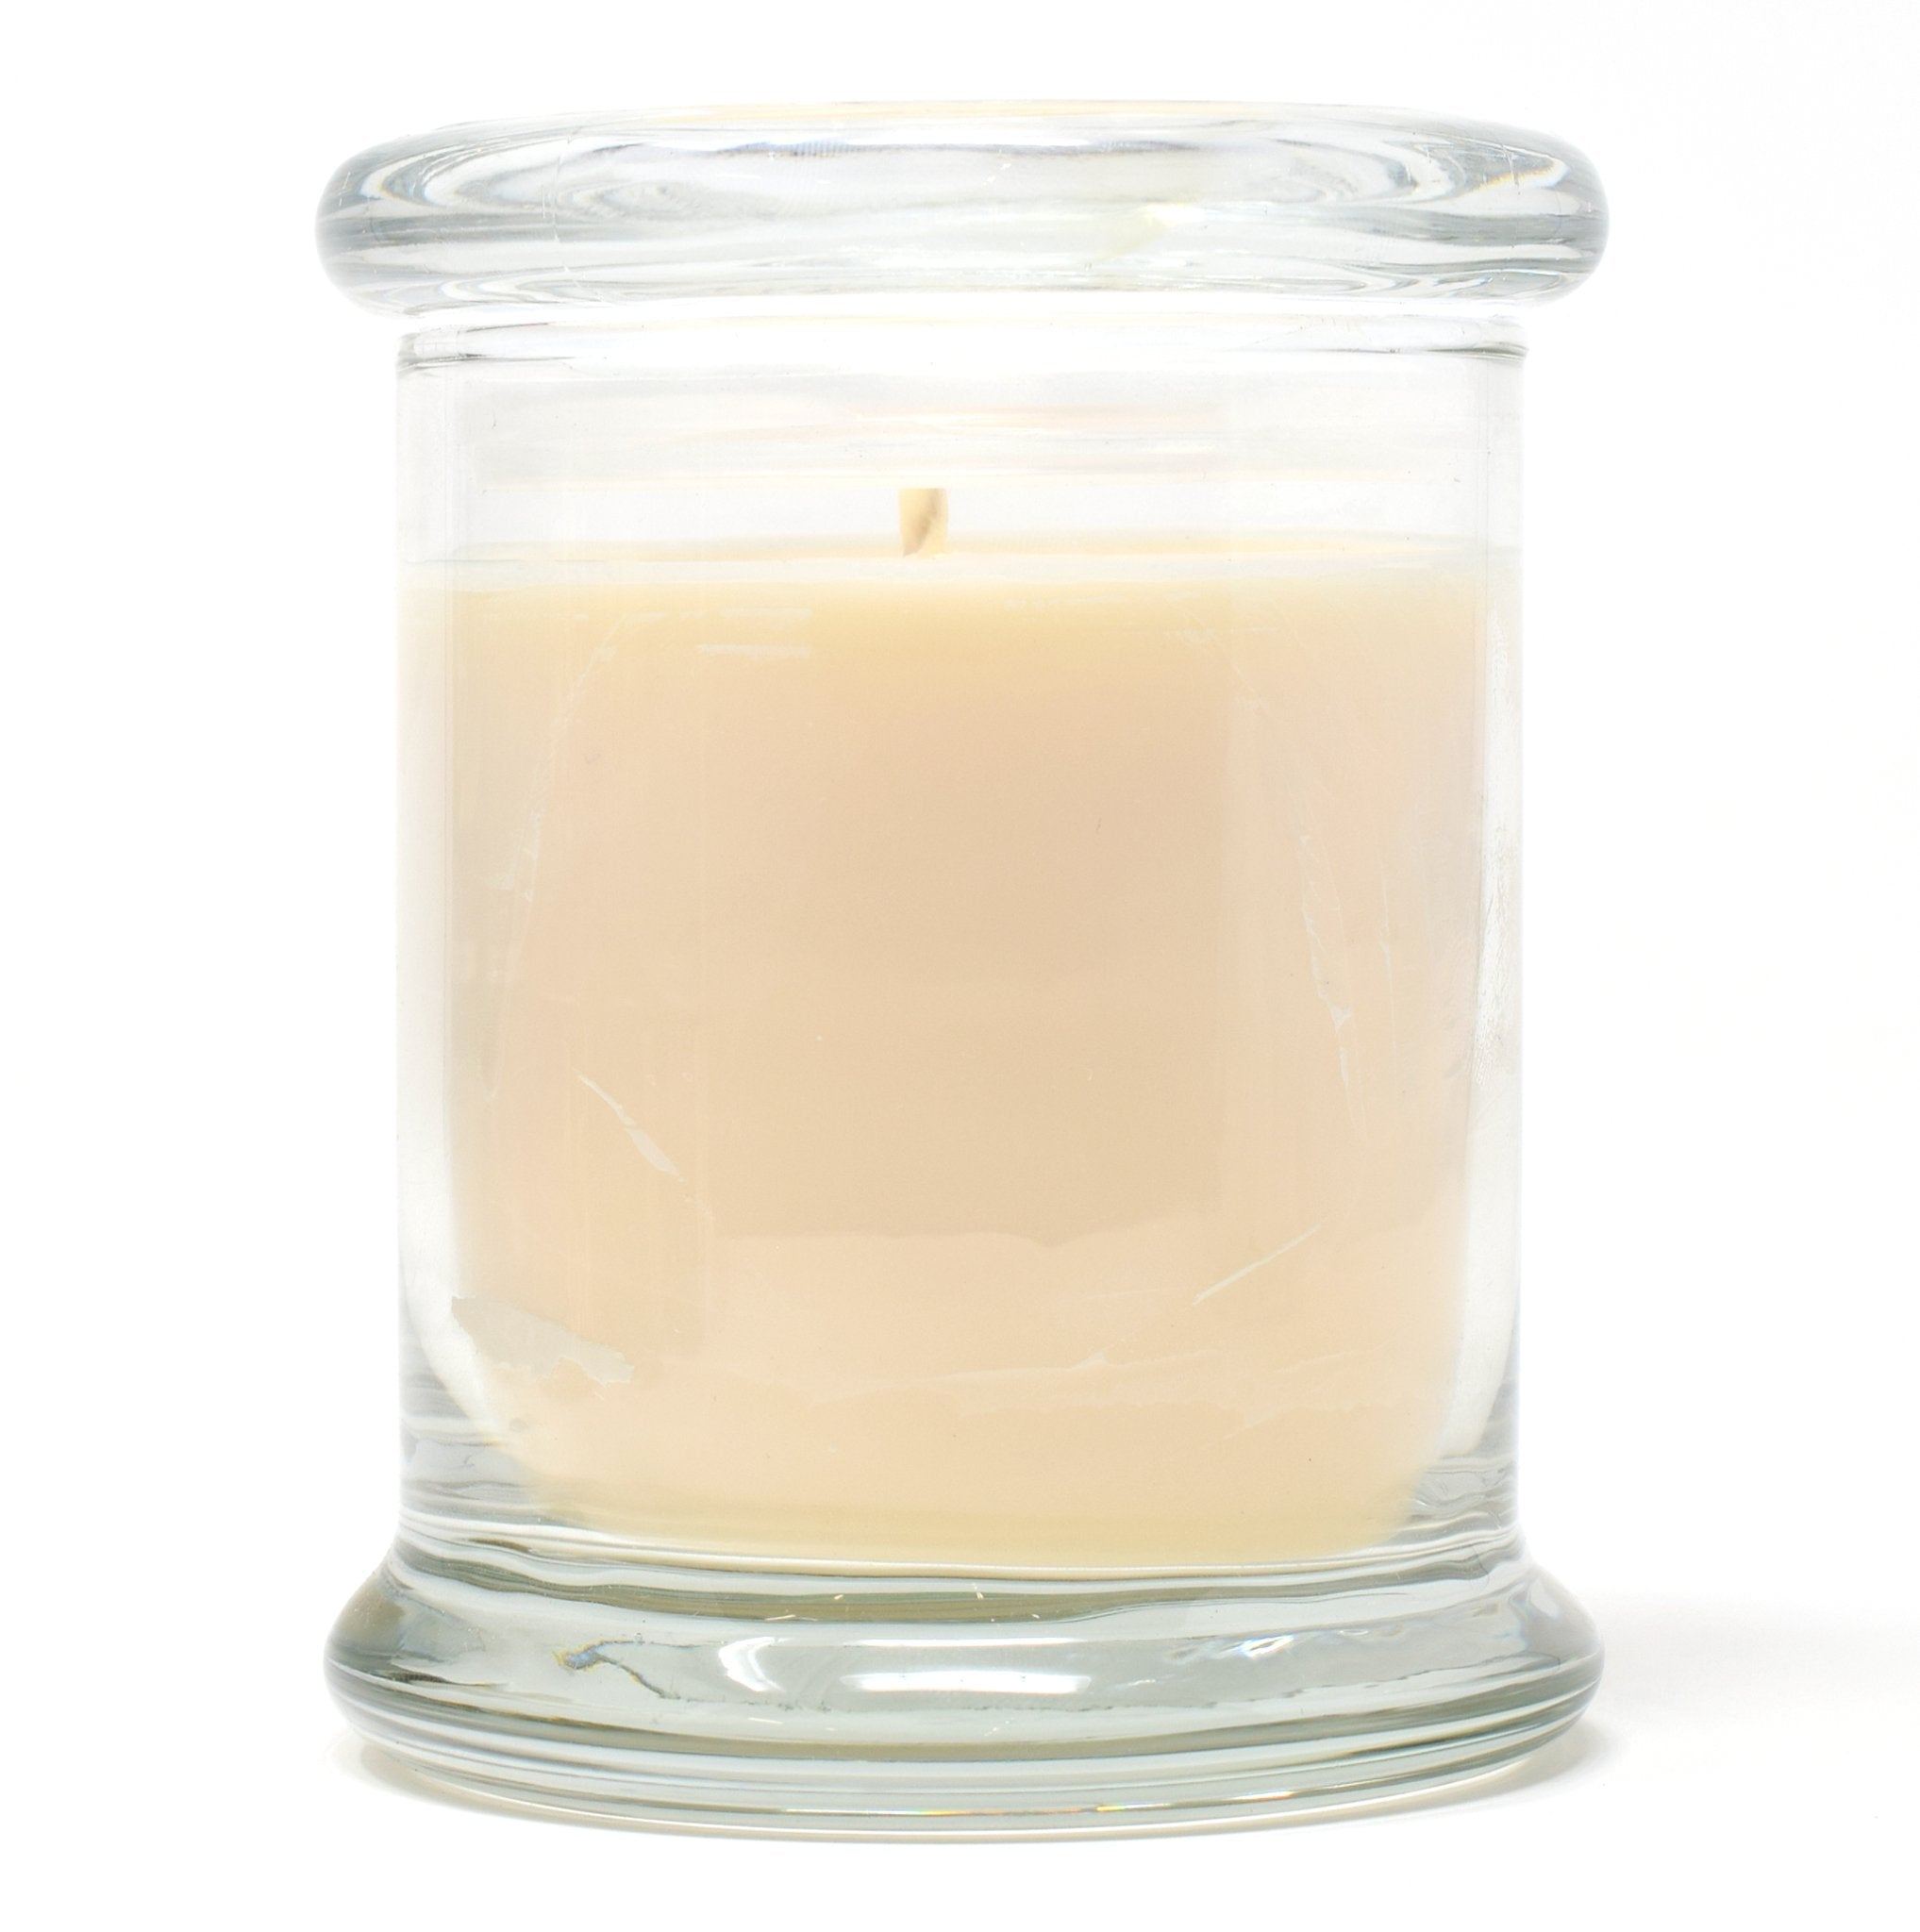 Baby Powder Soy Wax Candle 11 oz.– Southern Candle Studio